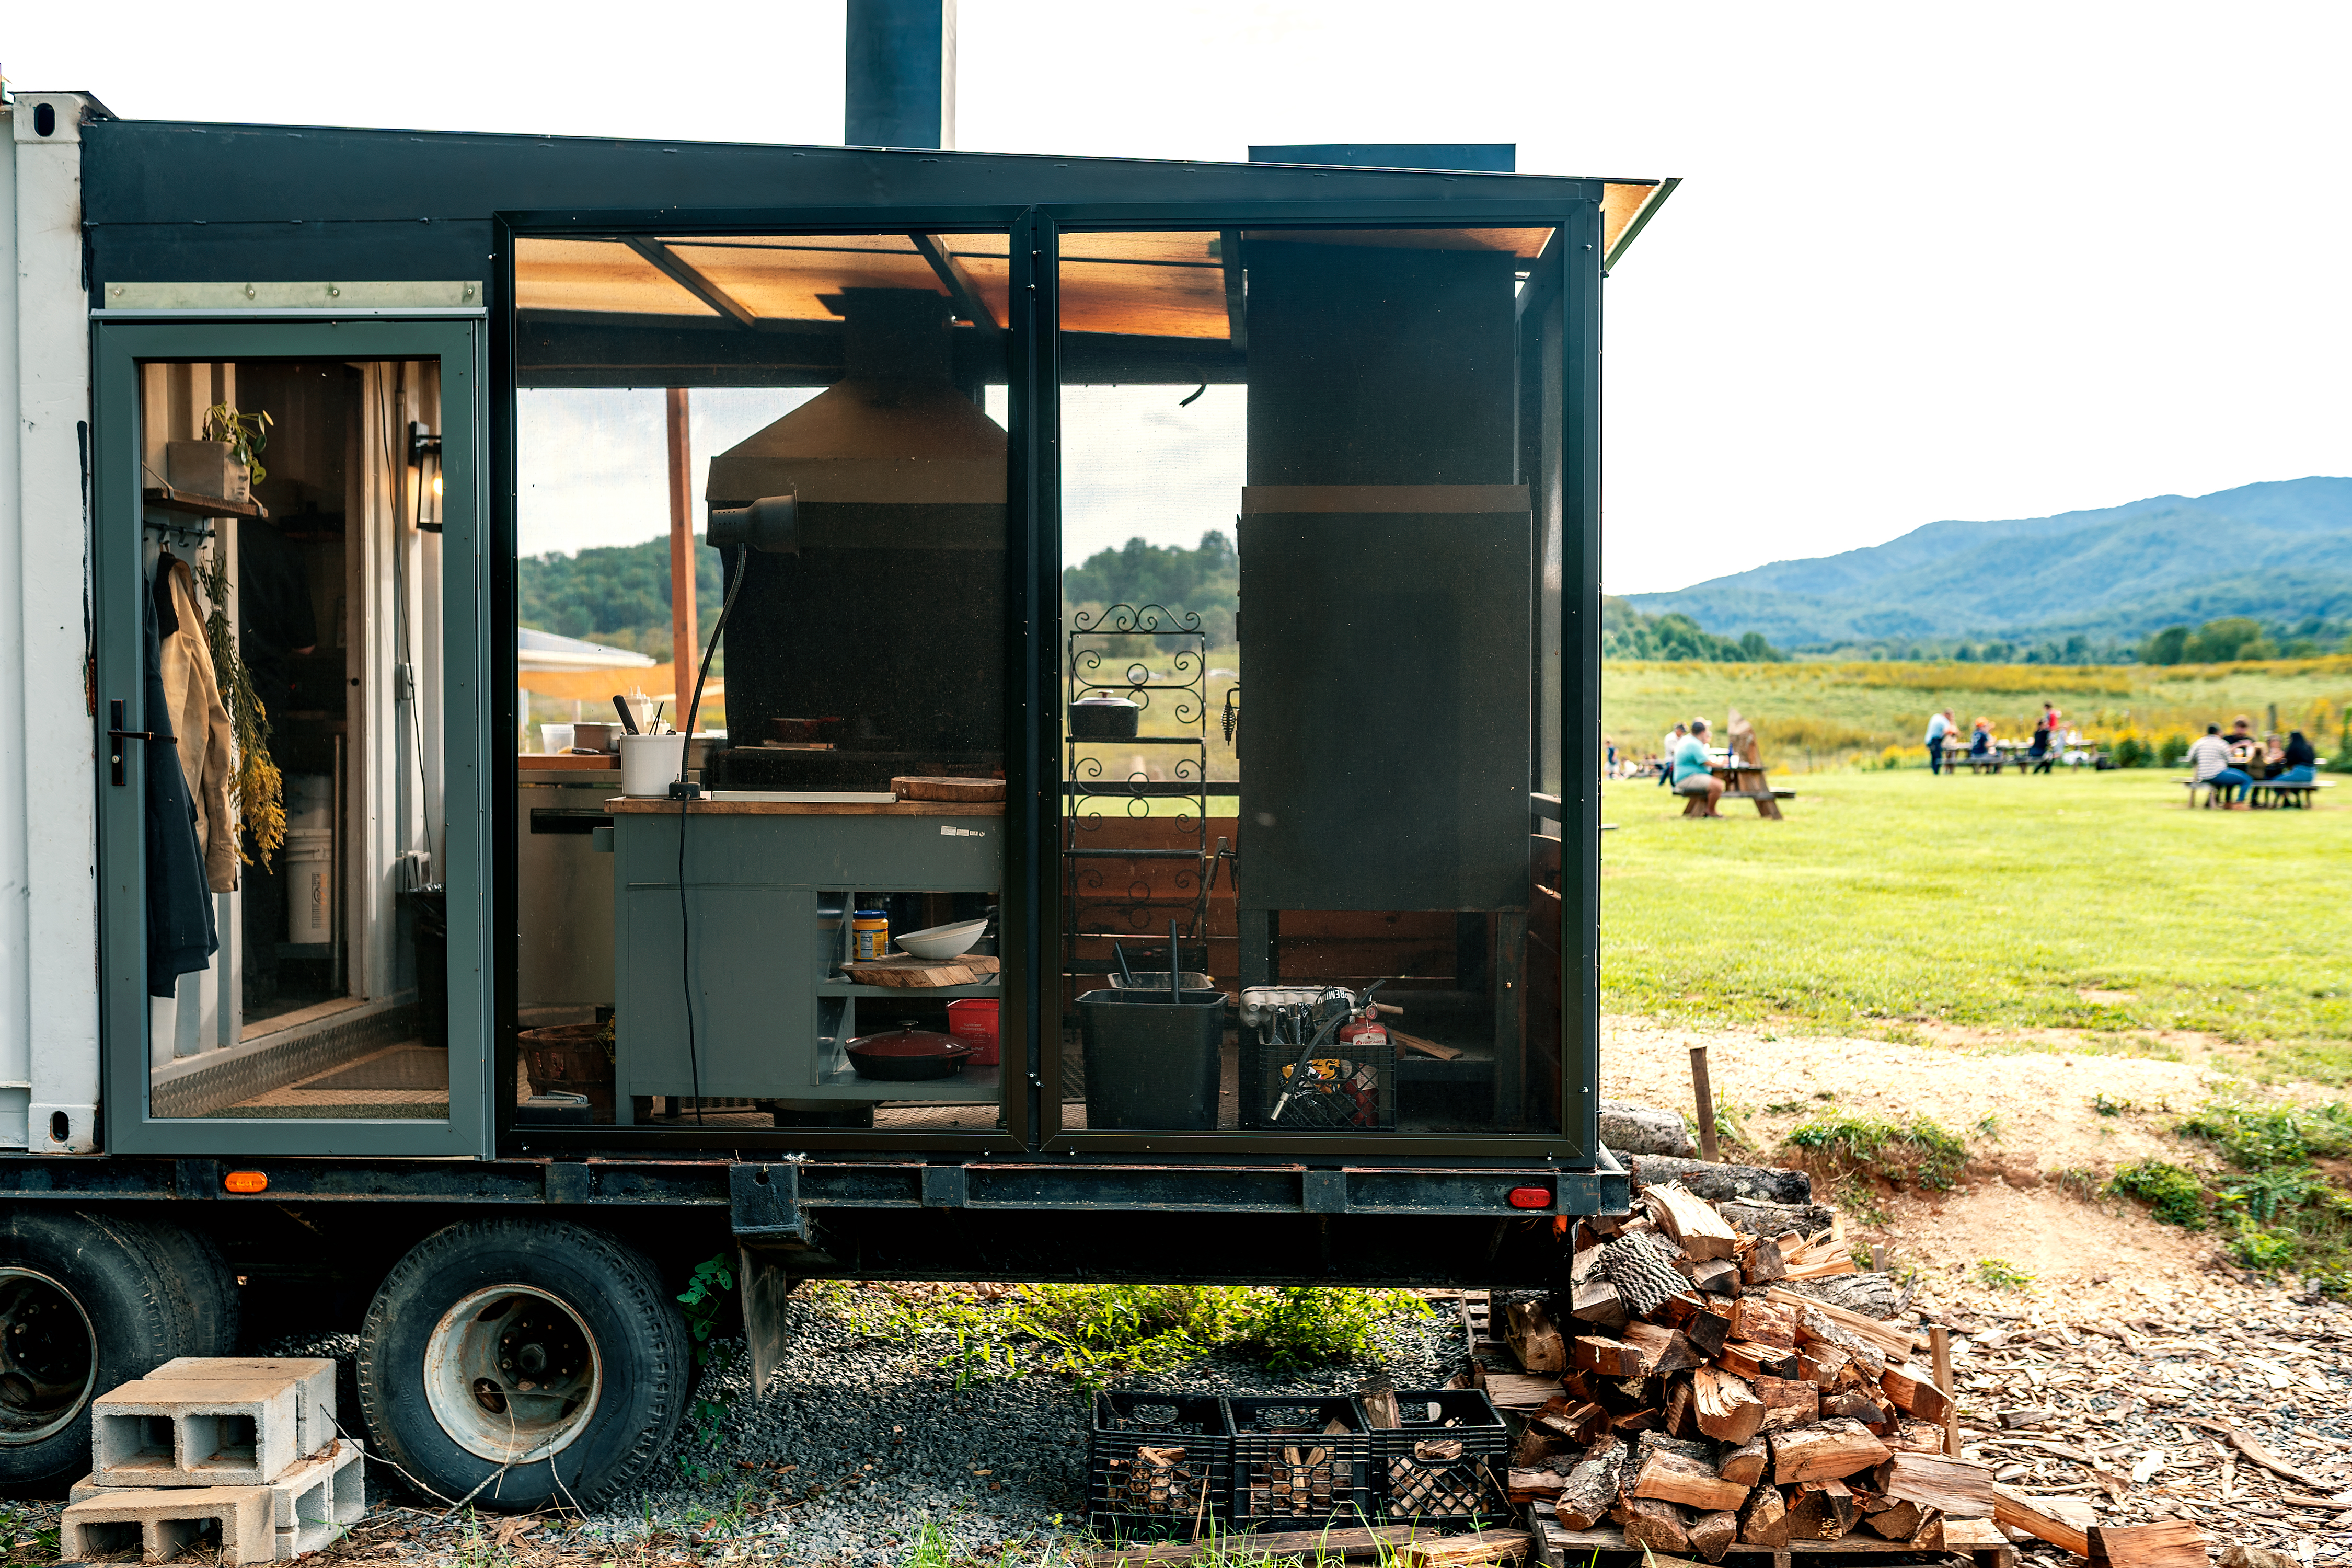 A view of two black, custom wood-burning hearths through the open, framed walls of a trailer extension that looks out over a field with a mountainous backdrop.